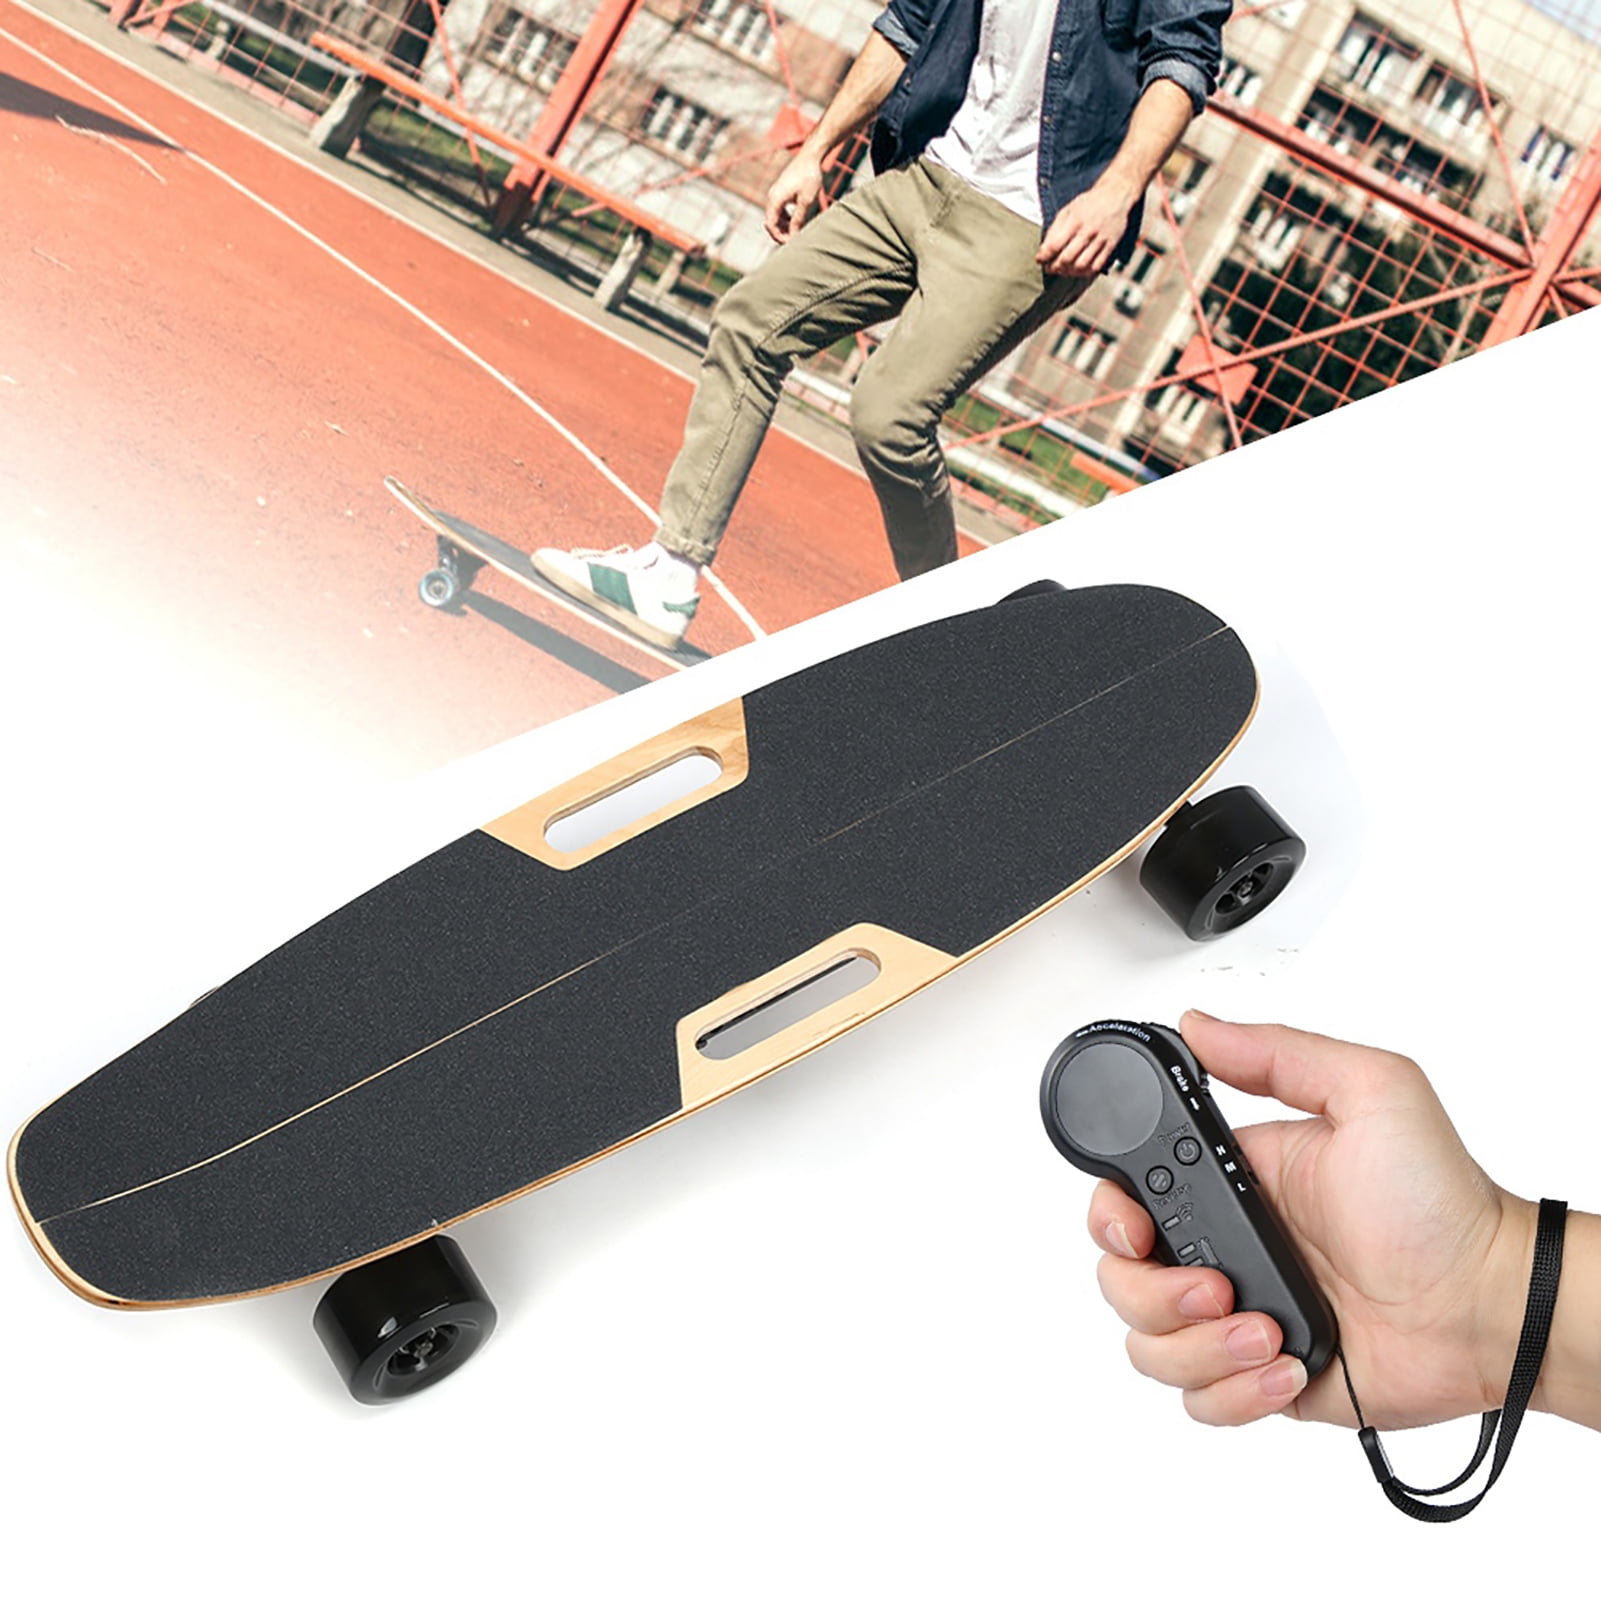 ANGGREK Electric Four-Wheel Skateboard Remote Control,Universal PP Remote Control Accessory with Supply Indicator Light for Four-Wheel Skateboard - Walmart.com